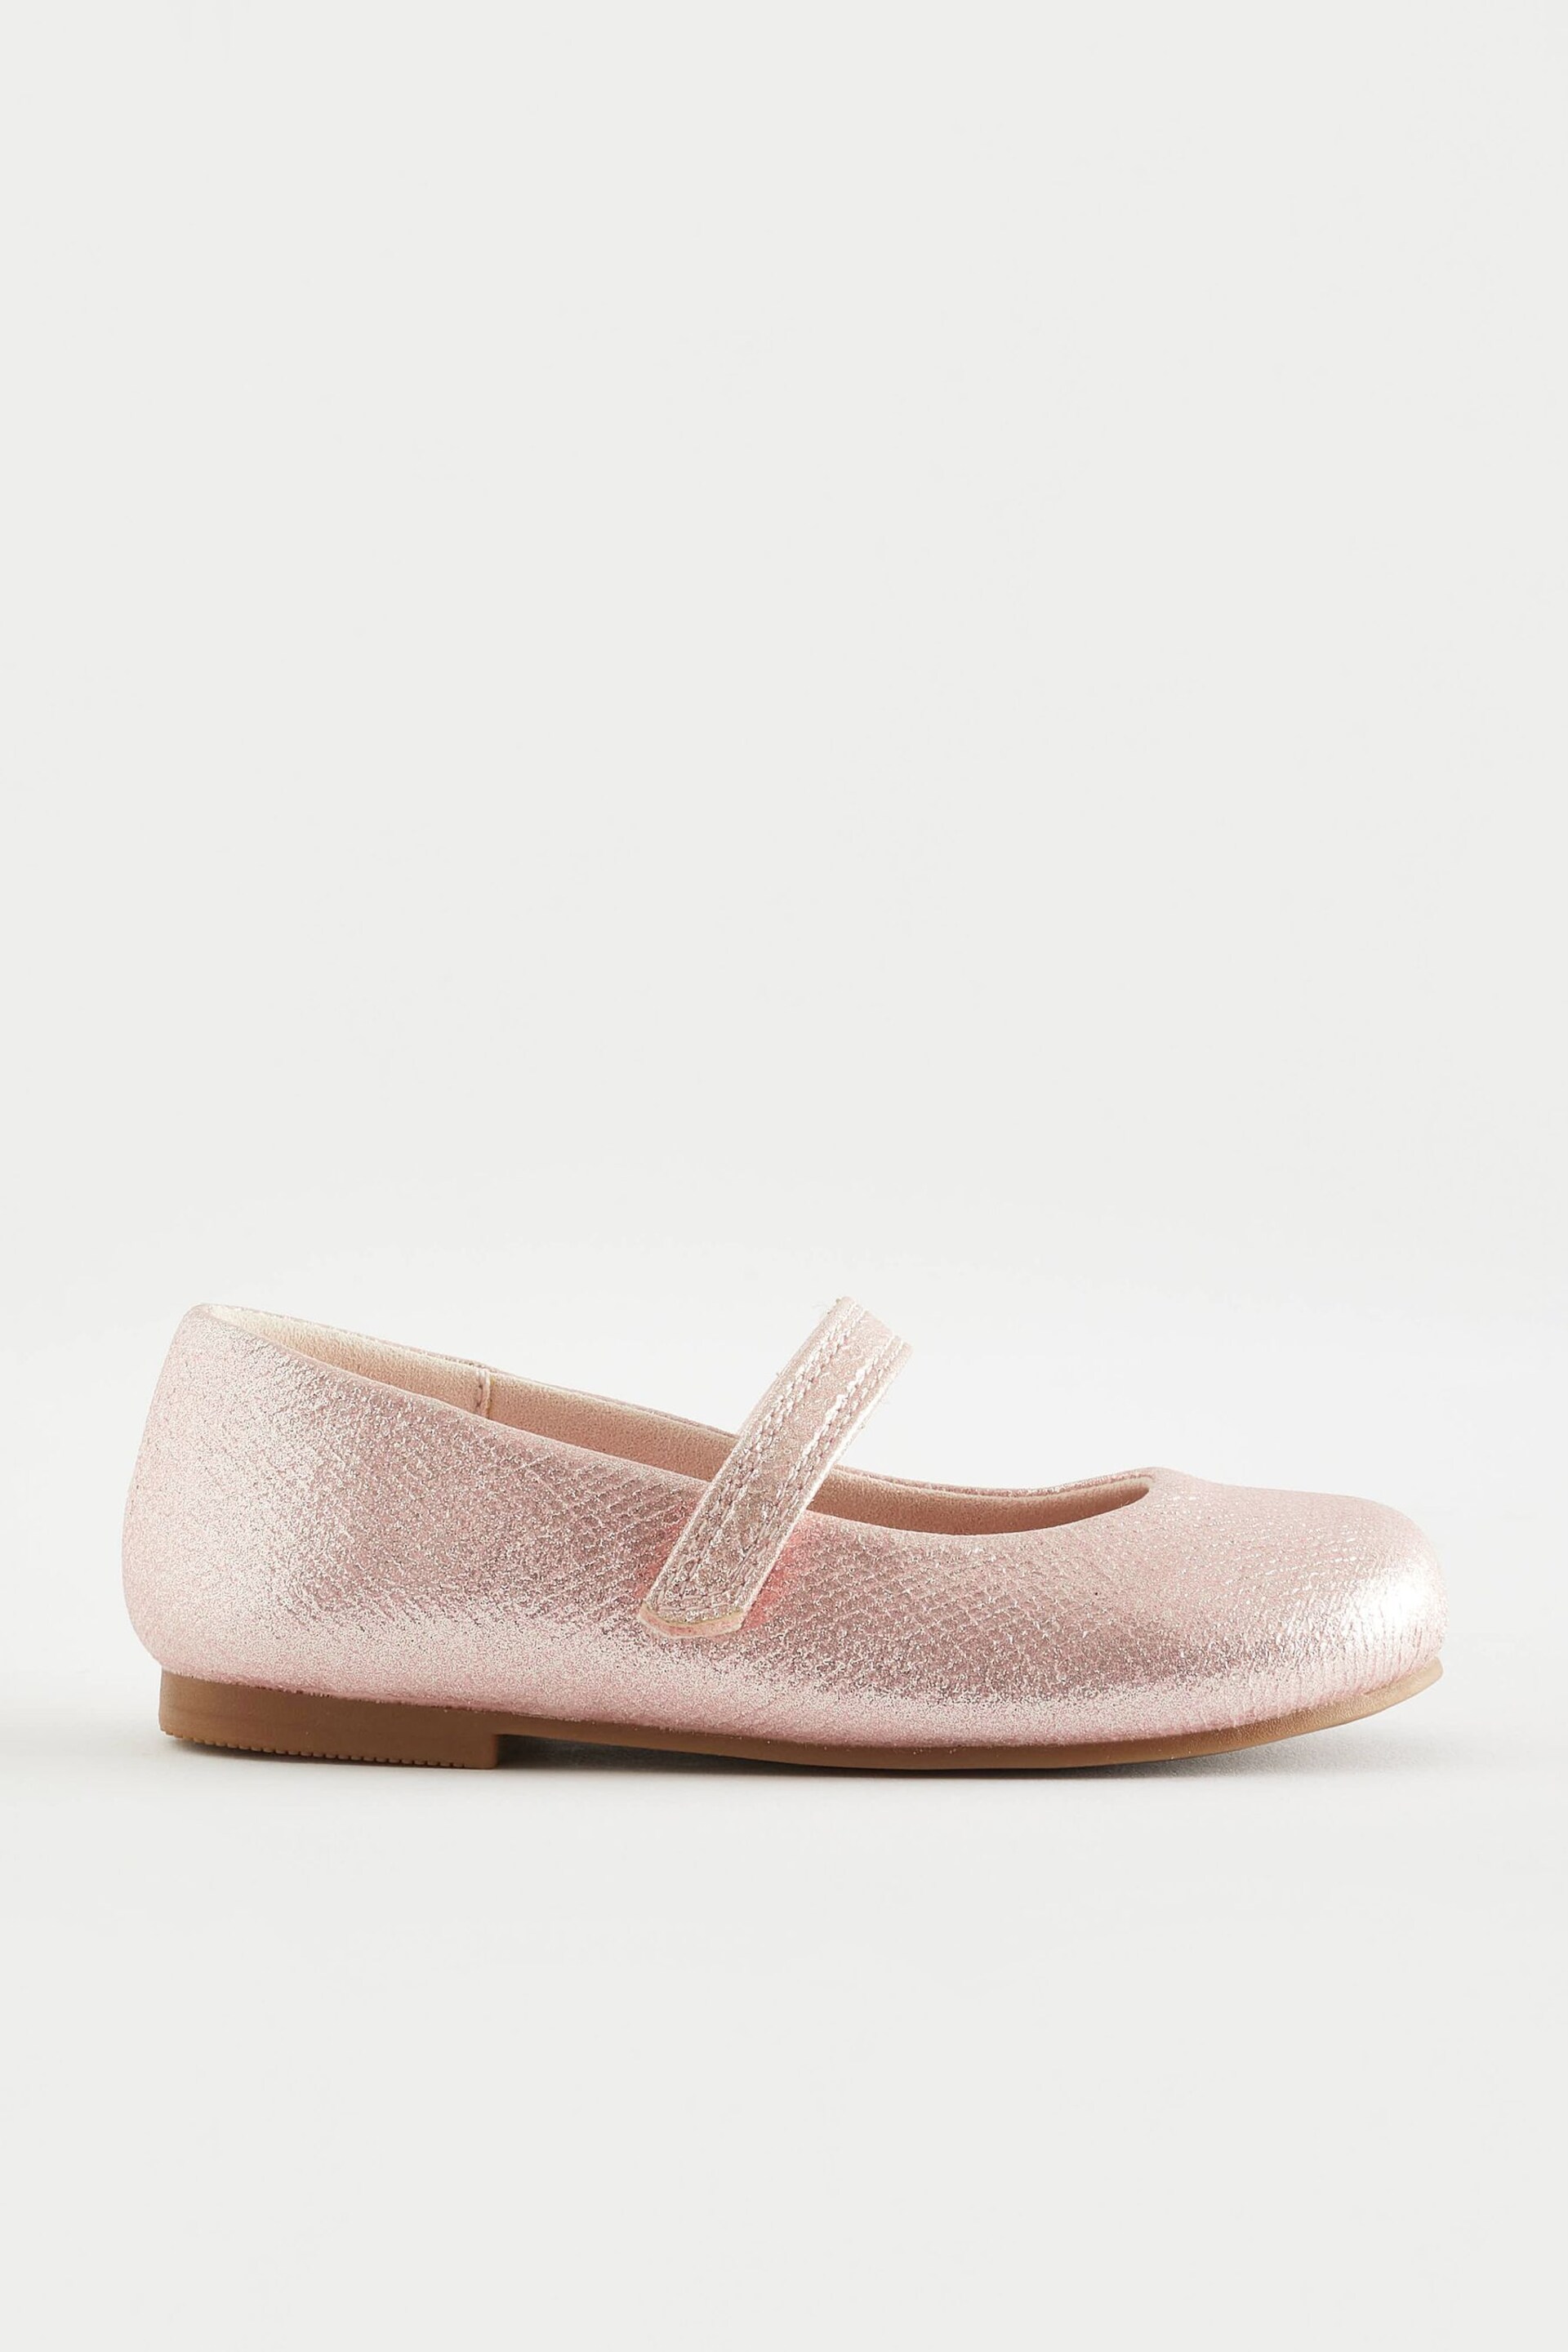 Pink Standard Fit (F) Mary Jane Occasion Shoes - Image 6 of 9